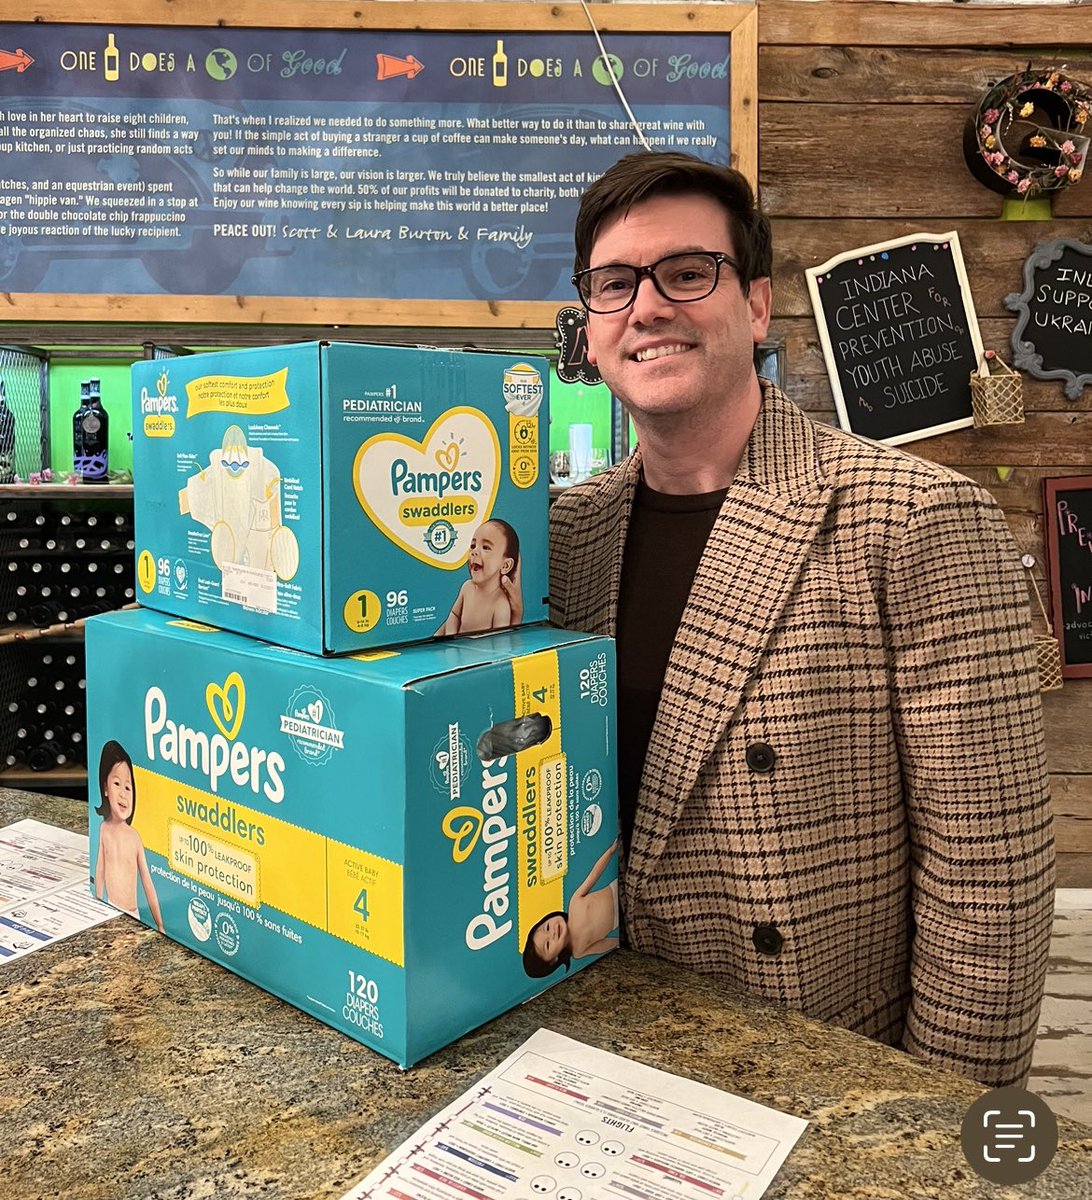 If you bring your Diaper Bank donation to @peacewaterwines by 12/31 you can get a free glass of wine for helping Hoosier families. 🍷 #SeasonOfGiving #HappyHolidays2022